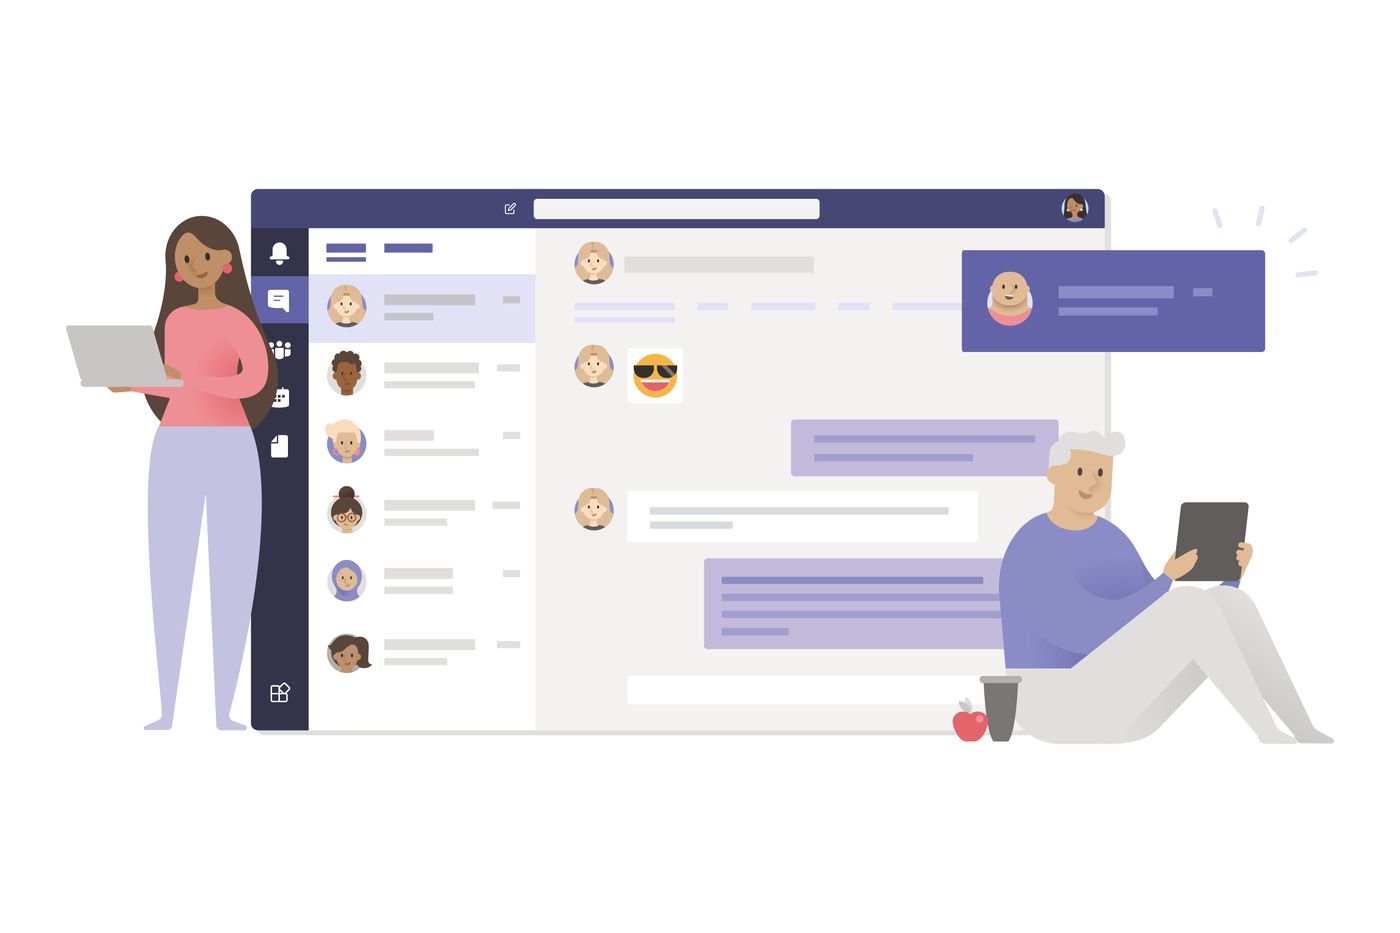 What’s New in Microsoft Teams